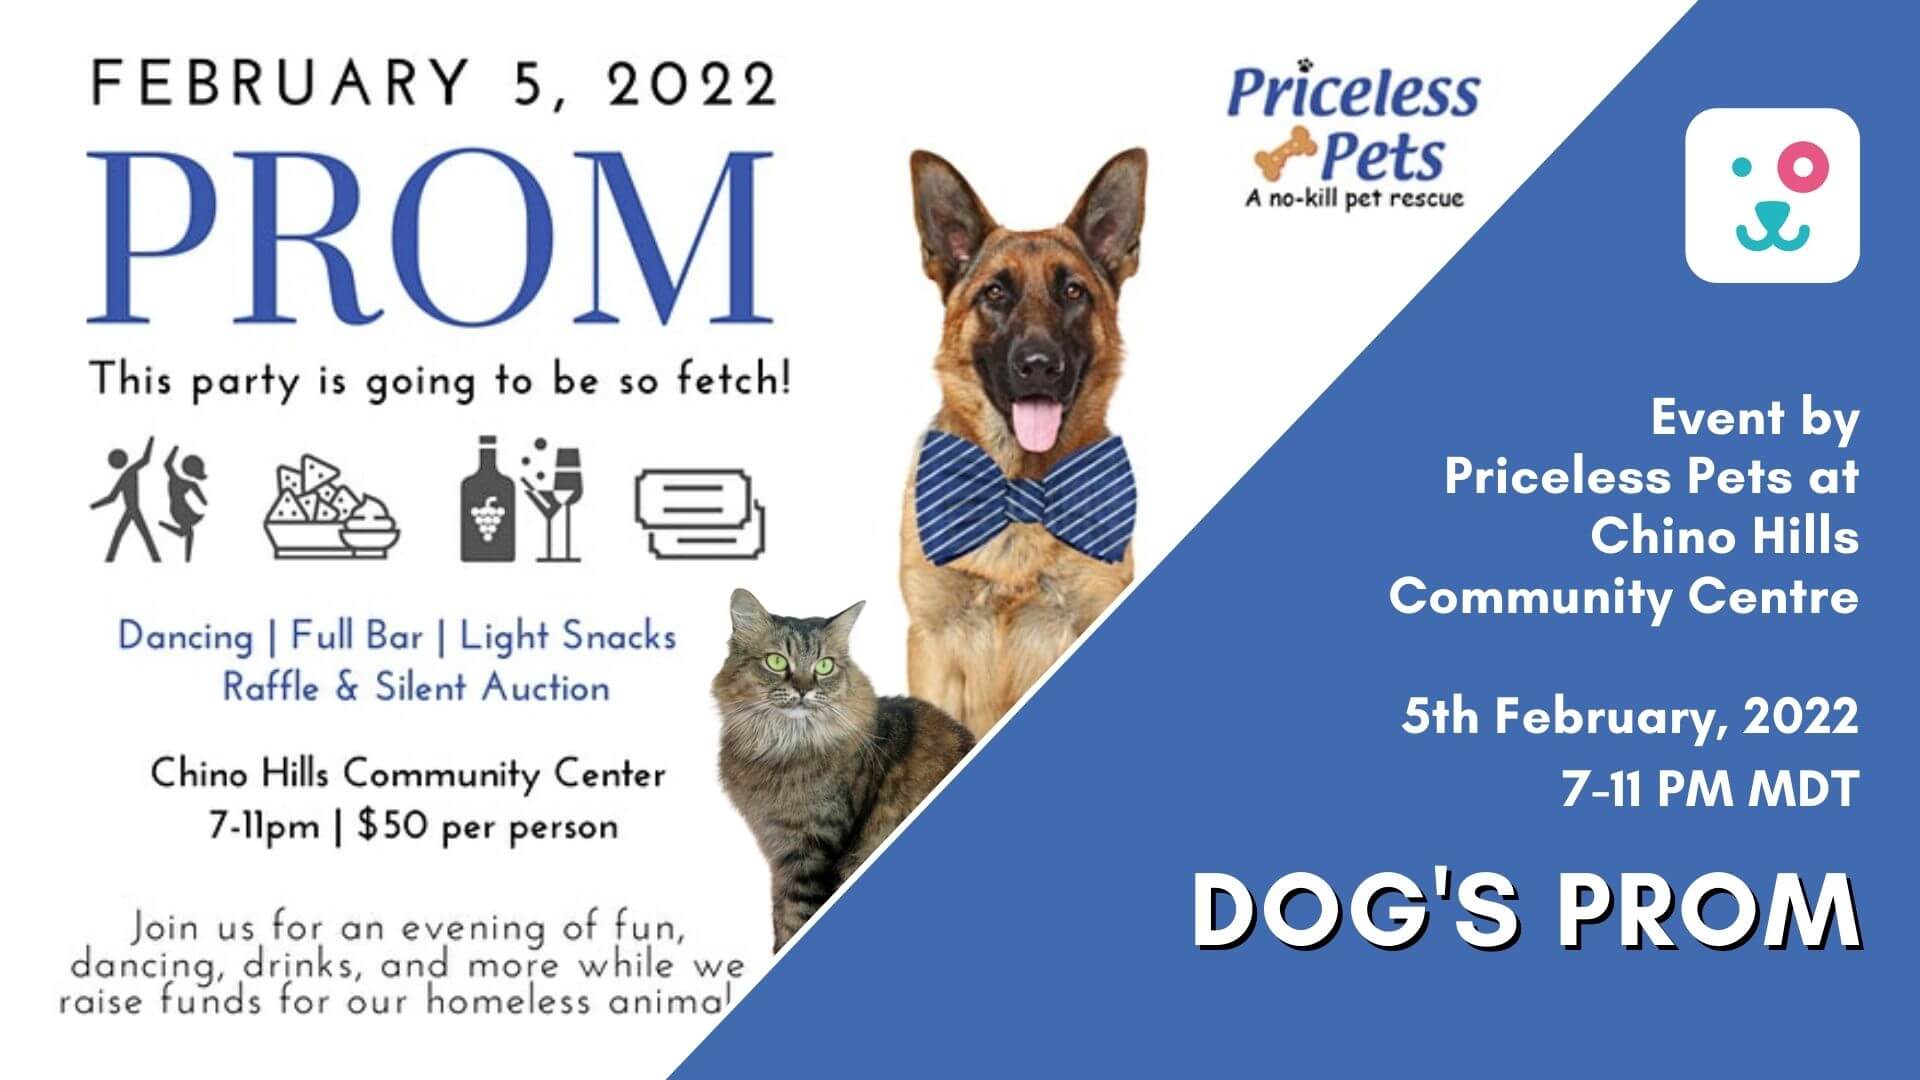 Priceless Pets Adult Prom